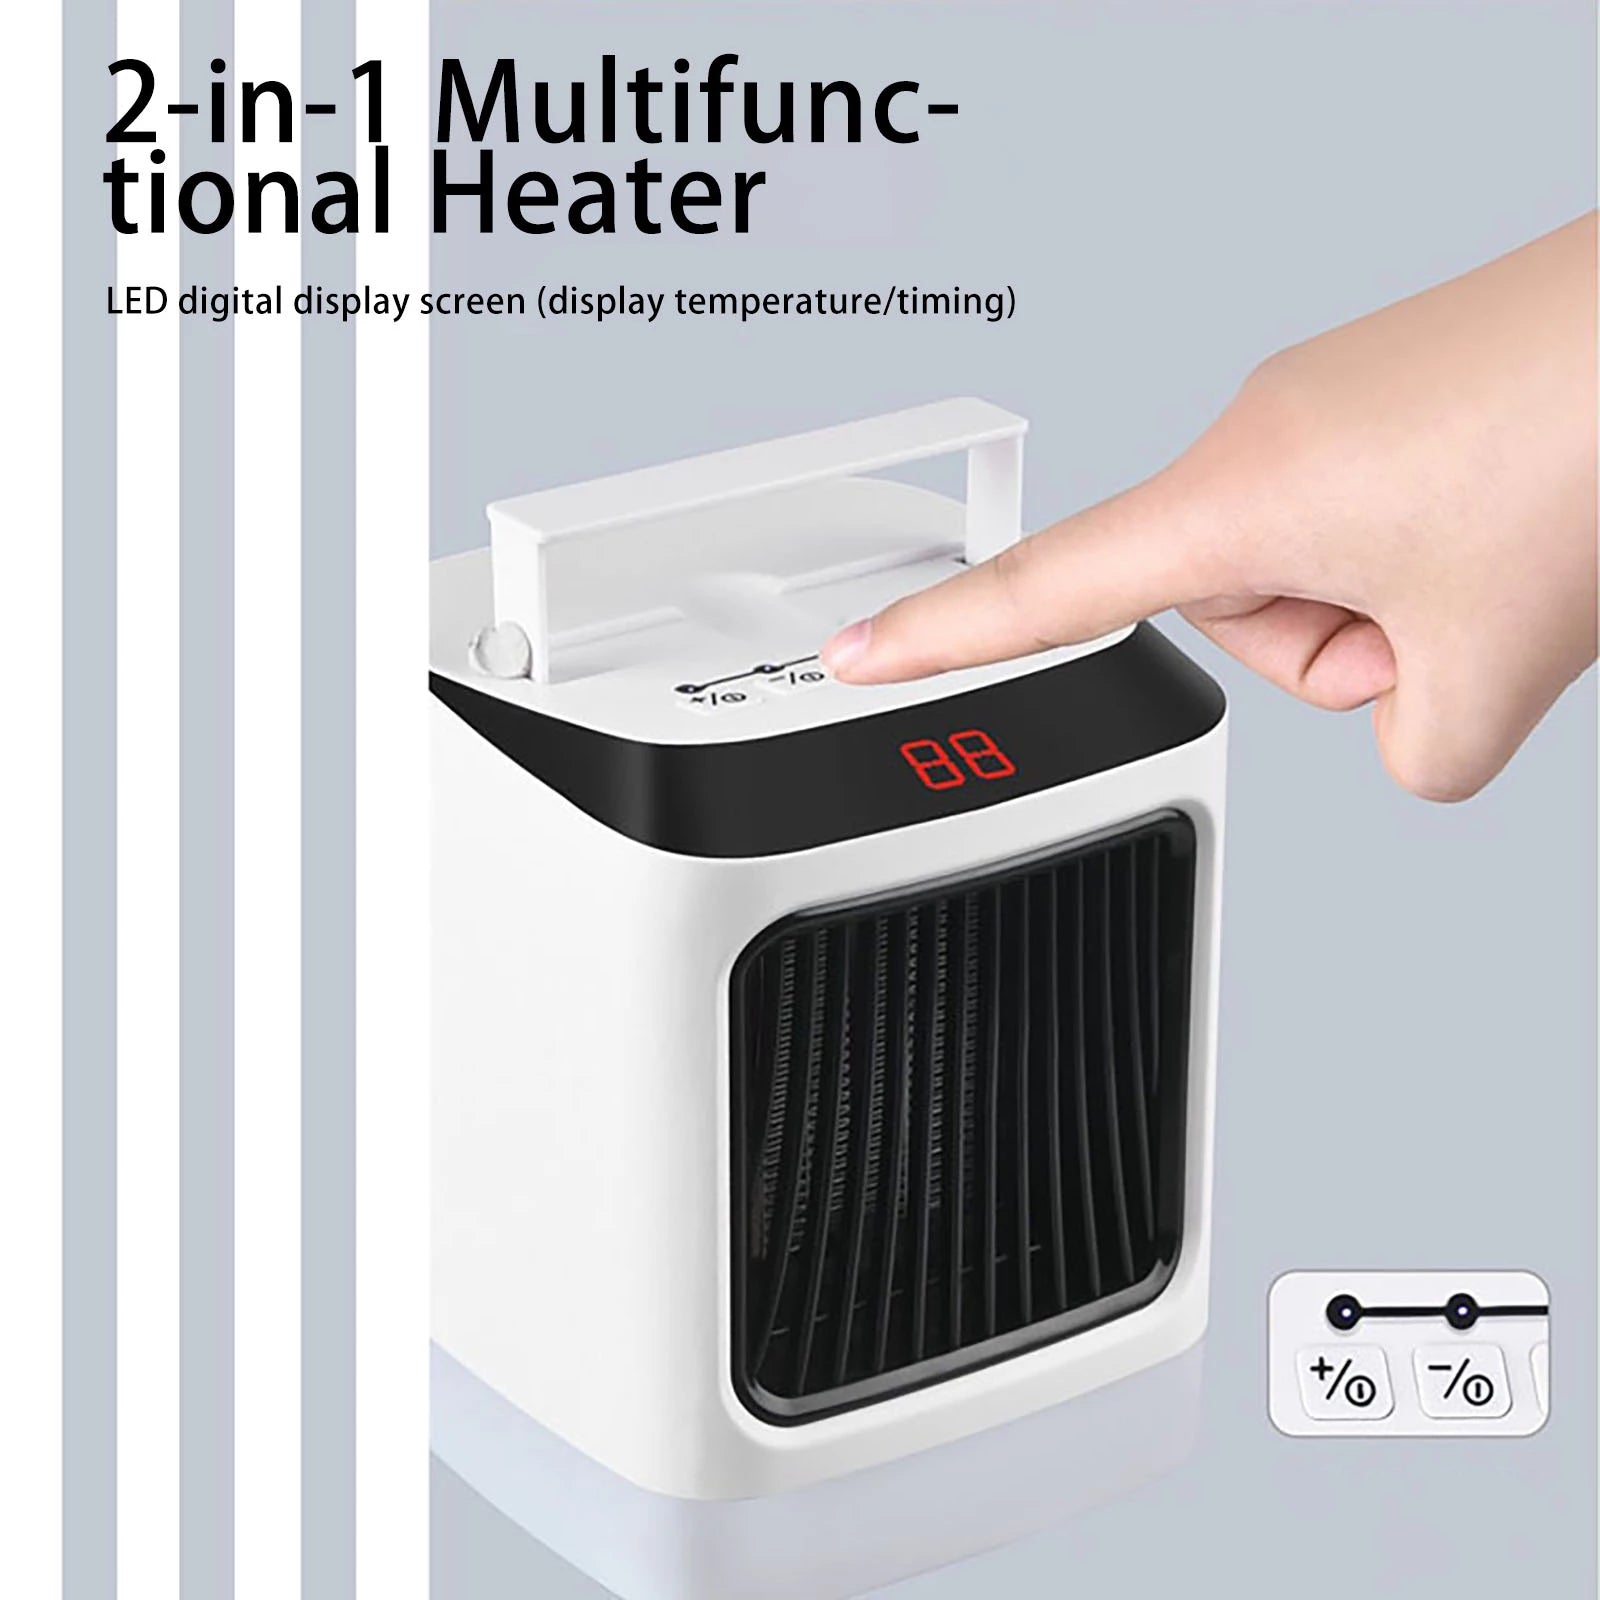 A compact portable heater with multiple heating elements, ideal for providing warmth in various settings.